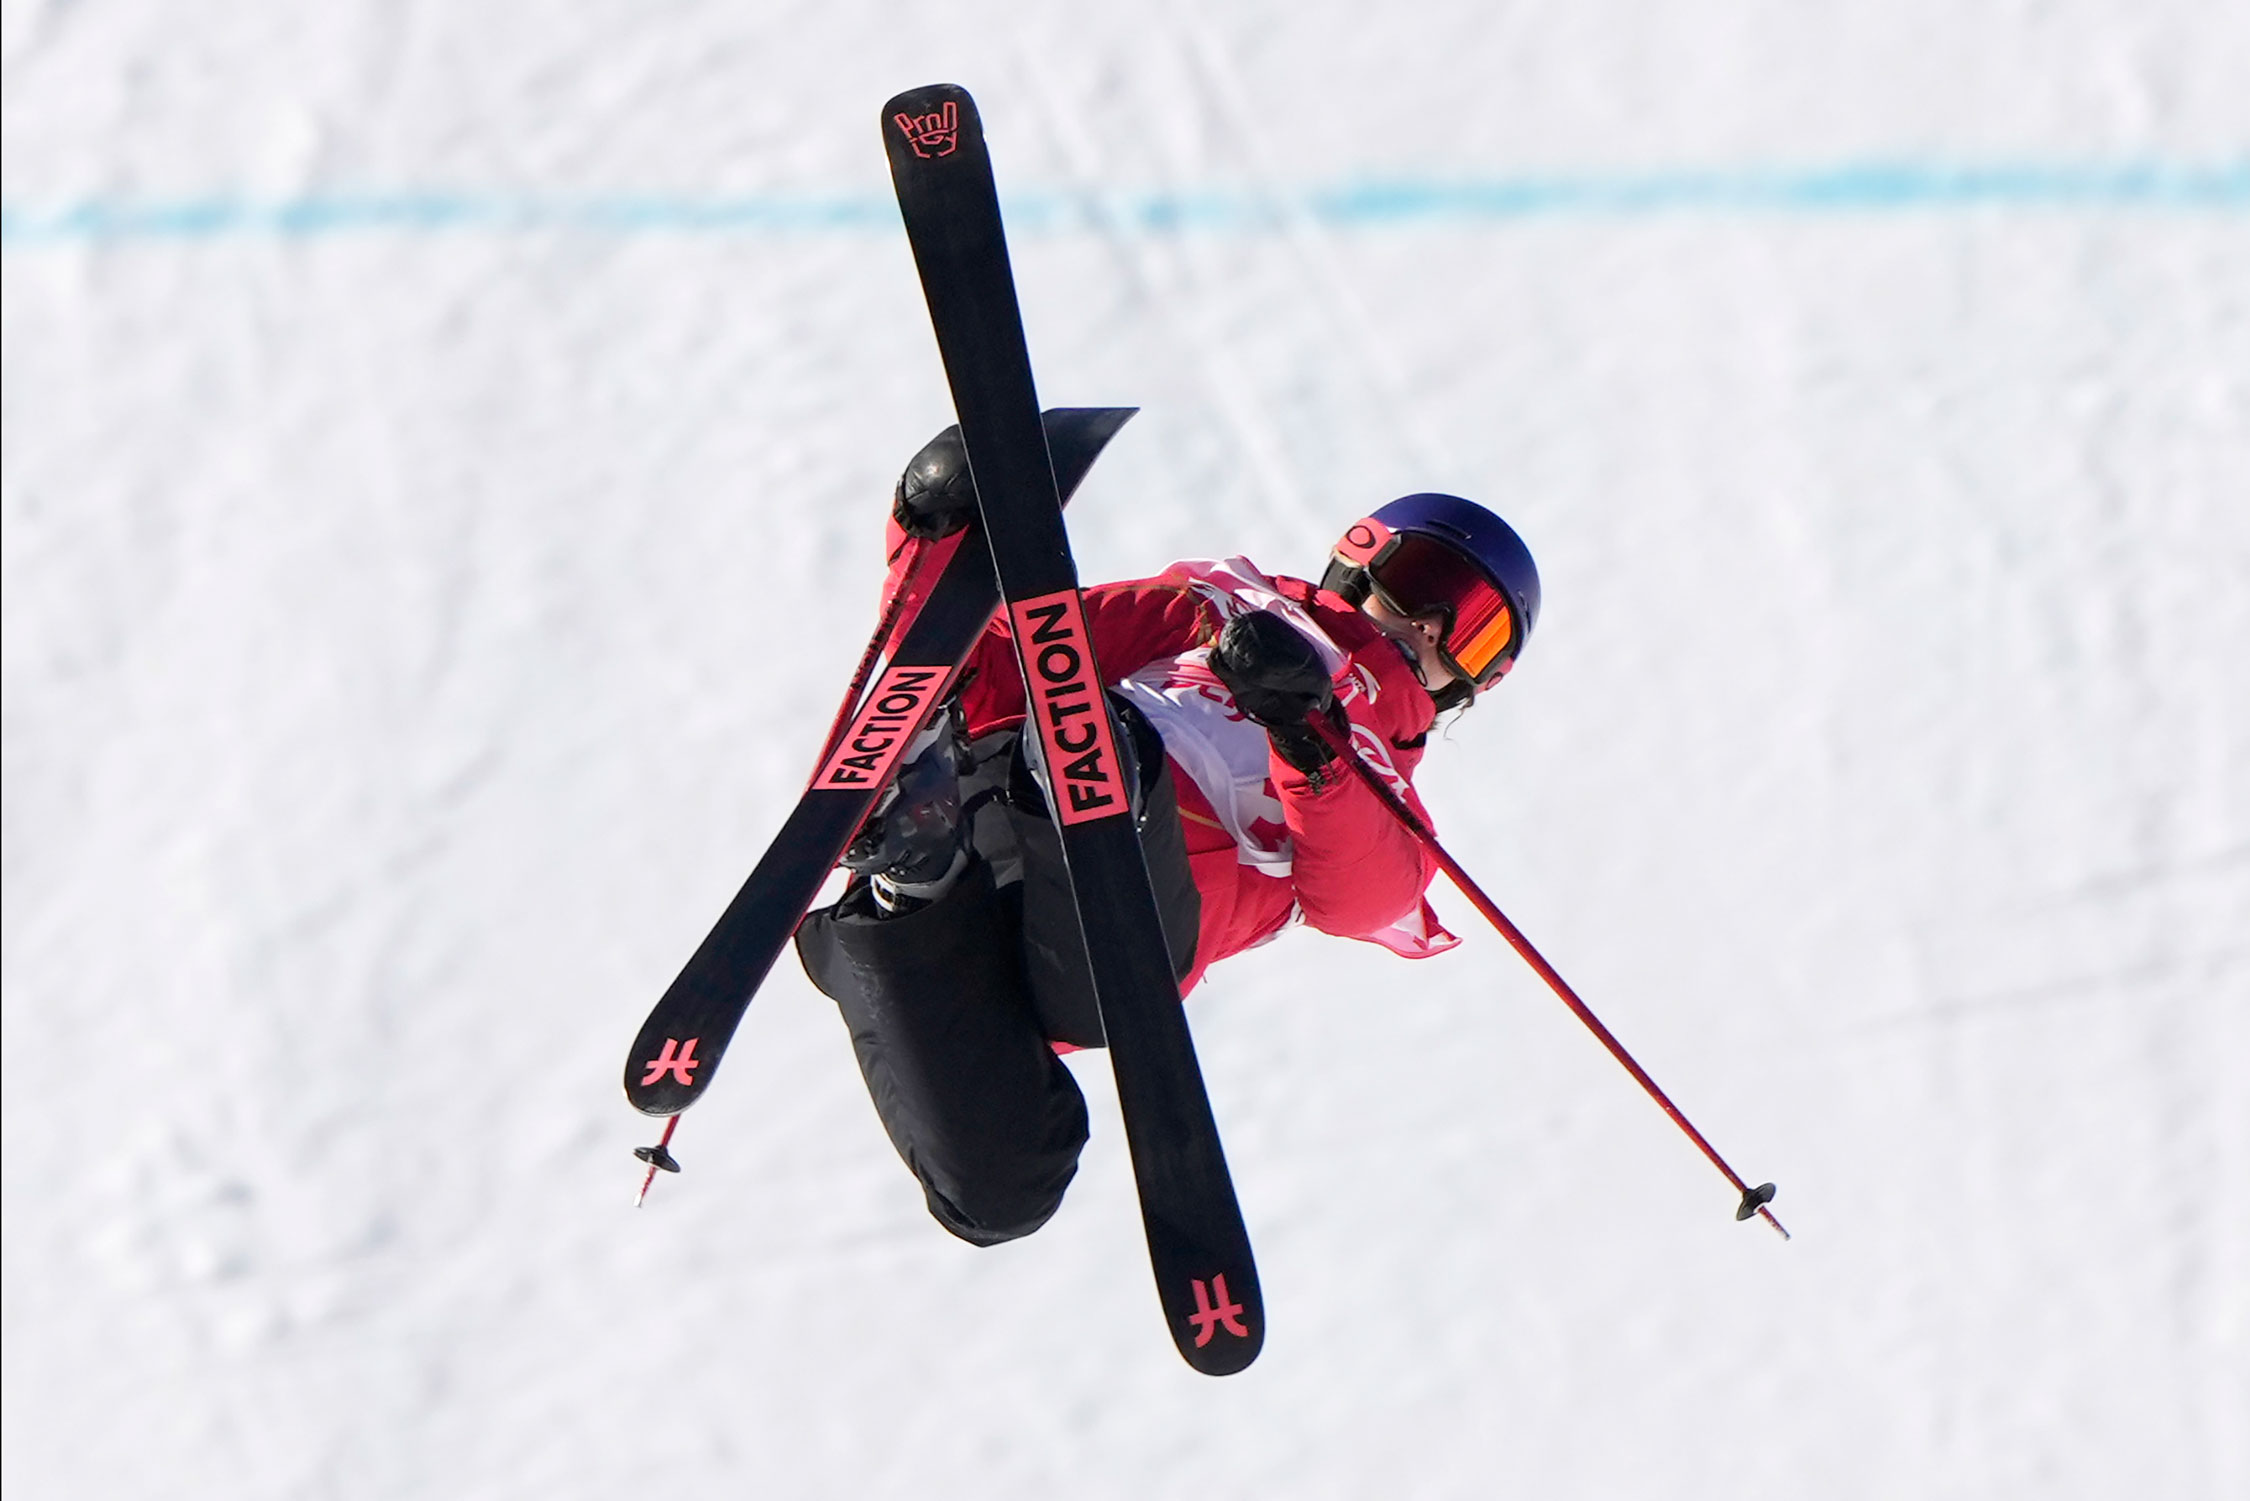 China's Eileen Gu competes during the women's slopestyle qualification on Monday.